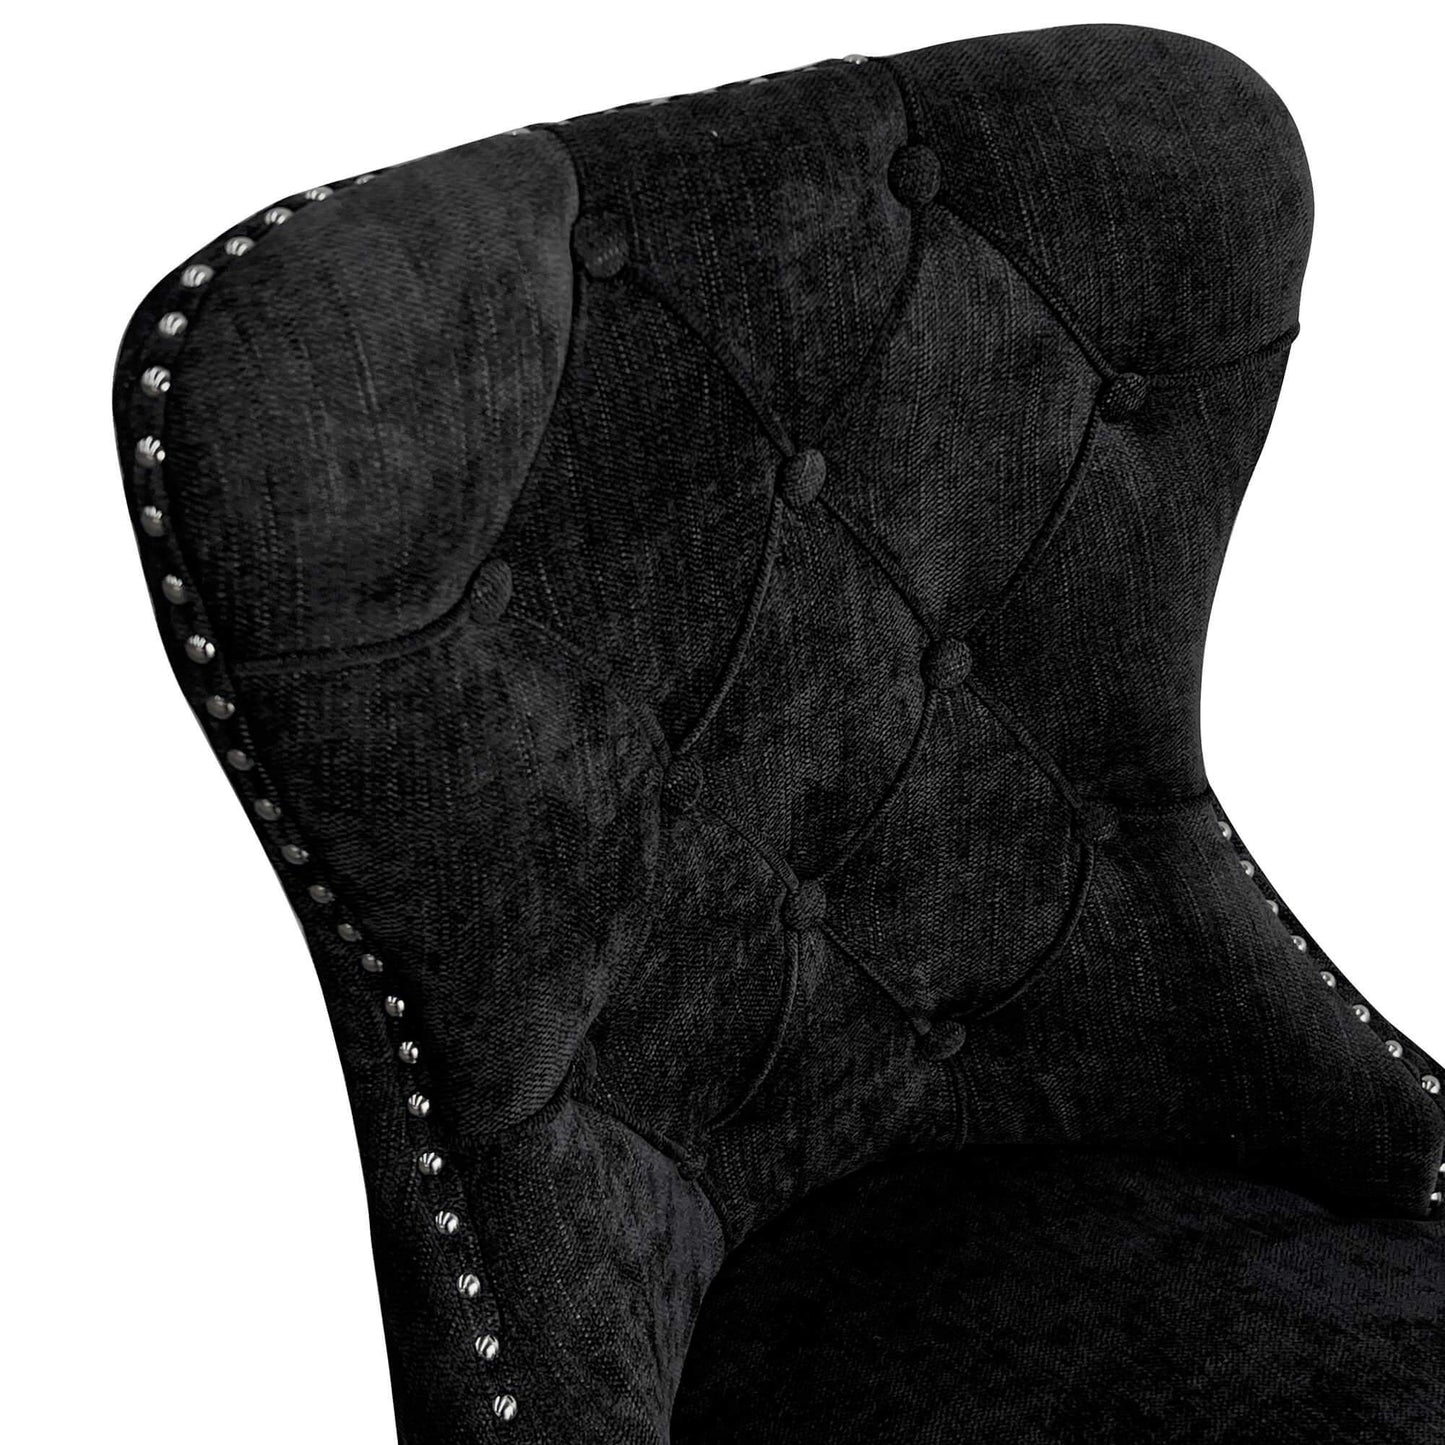 Genoa Version 1 | Fabric French Provincial Wooden Dining Chairs | Set Of 2 | Black